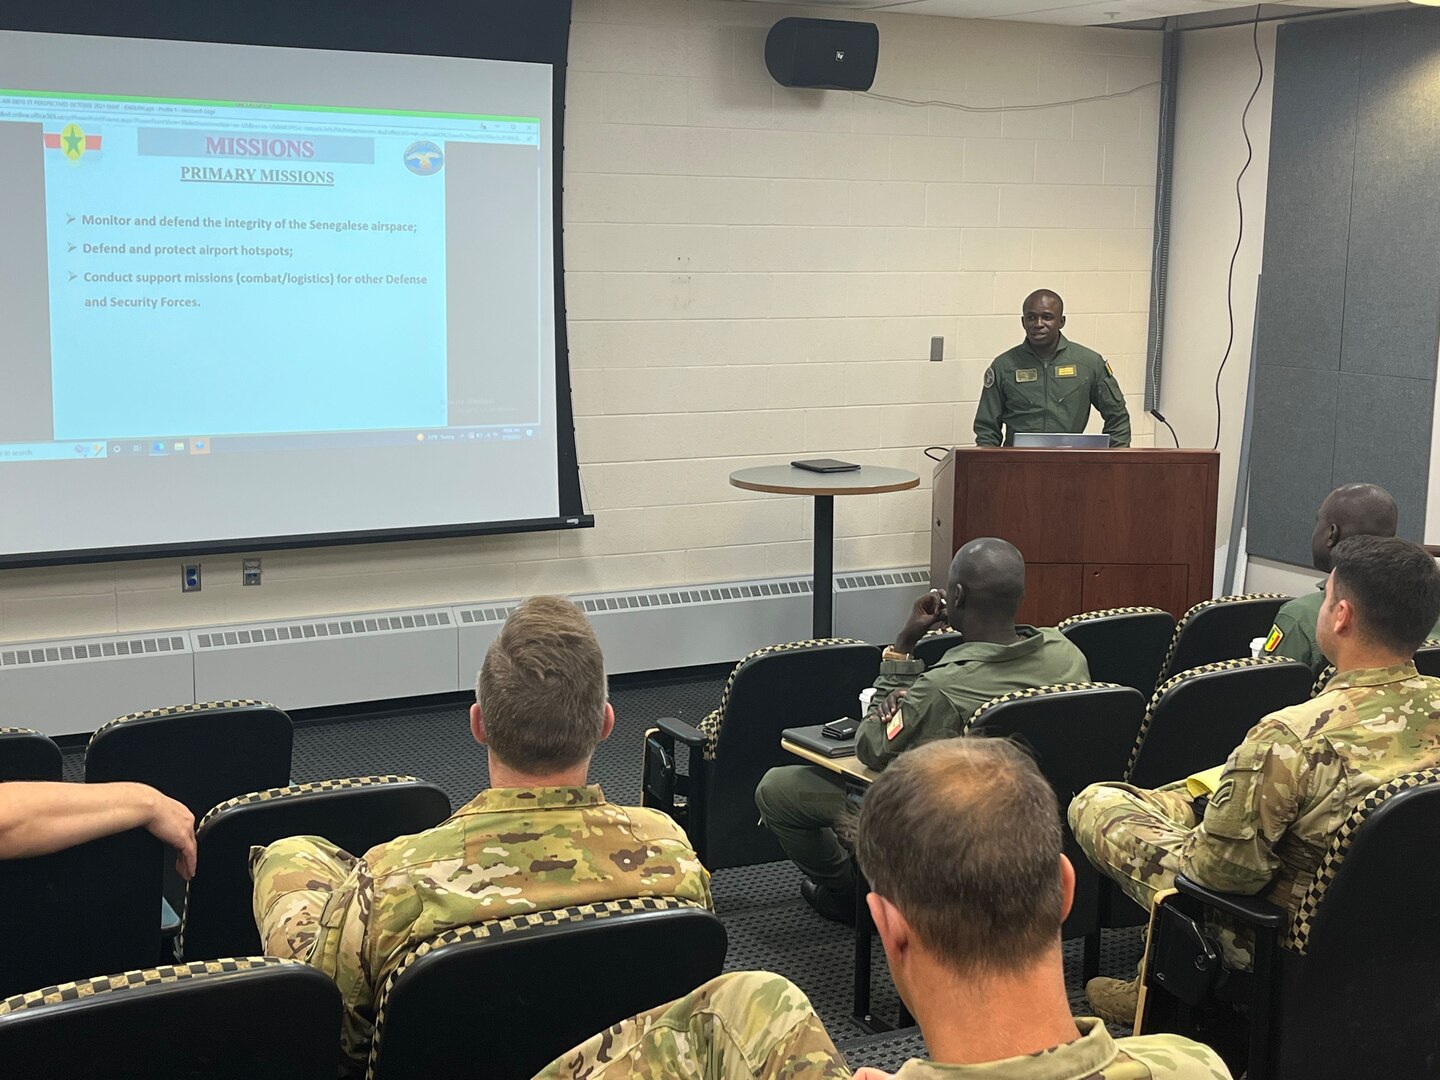 Senegal Air Force Capt. Kana Ndiaye, a helicopter pilot, briefs Vermont Army National Guard Blackhawk pilots during a State Partnership Program visit to the Army Aviation Flight Facility, Burlington, Vermont. The Vermont Army National Guard hosted three Senegalese Air Force pilots July 17-22, 2022, to conduct safety, operations, and maintenance cross-training with VTARNG’s Aviators during the trip. The Department of Defense’s State Partnership Program pairs U.S. state National Guard units with other nations to facilitate international civil-military relationships. (U.S. Army National Guard photo by Sgt. 1st Class Jason Alvarez)